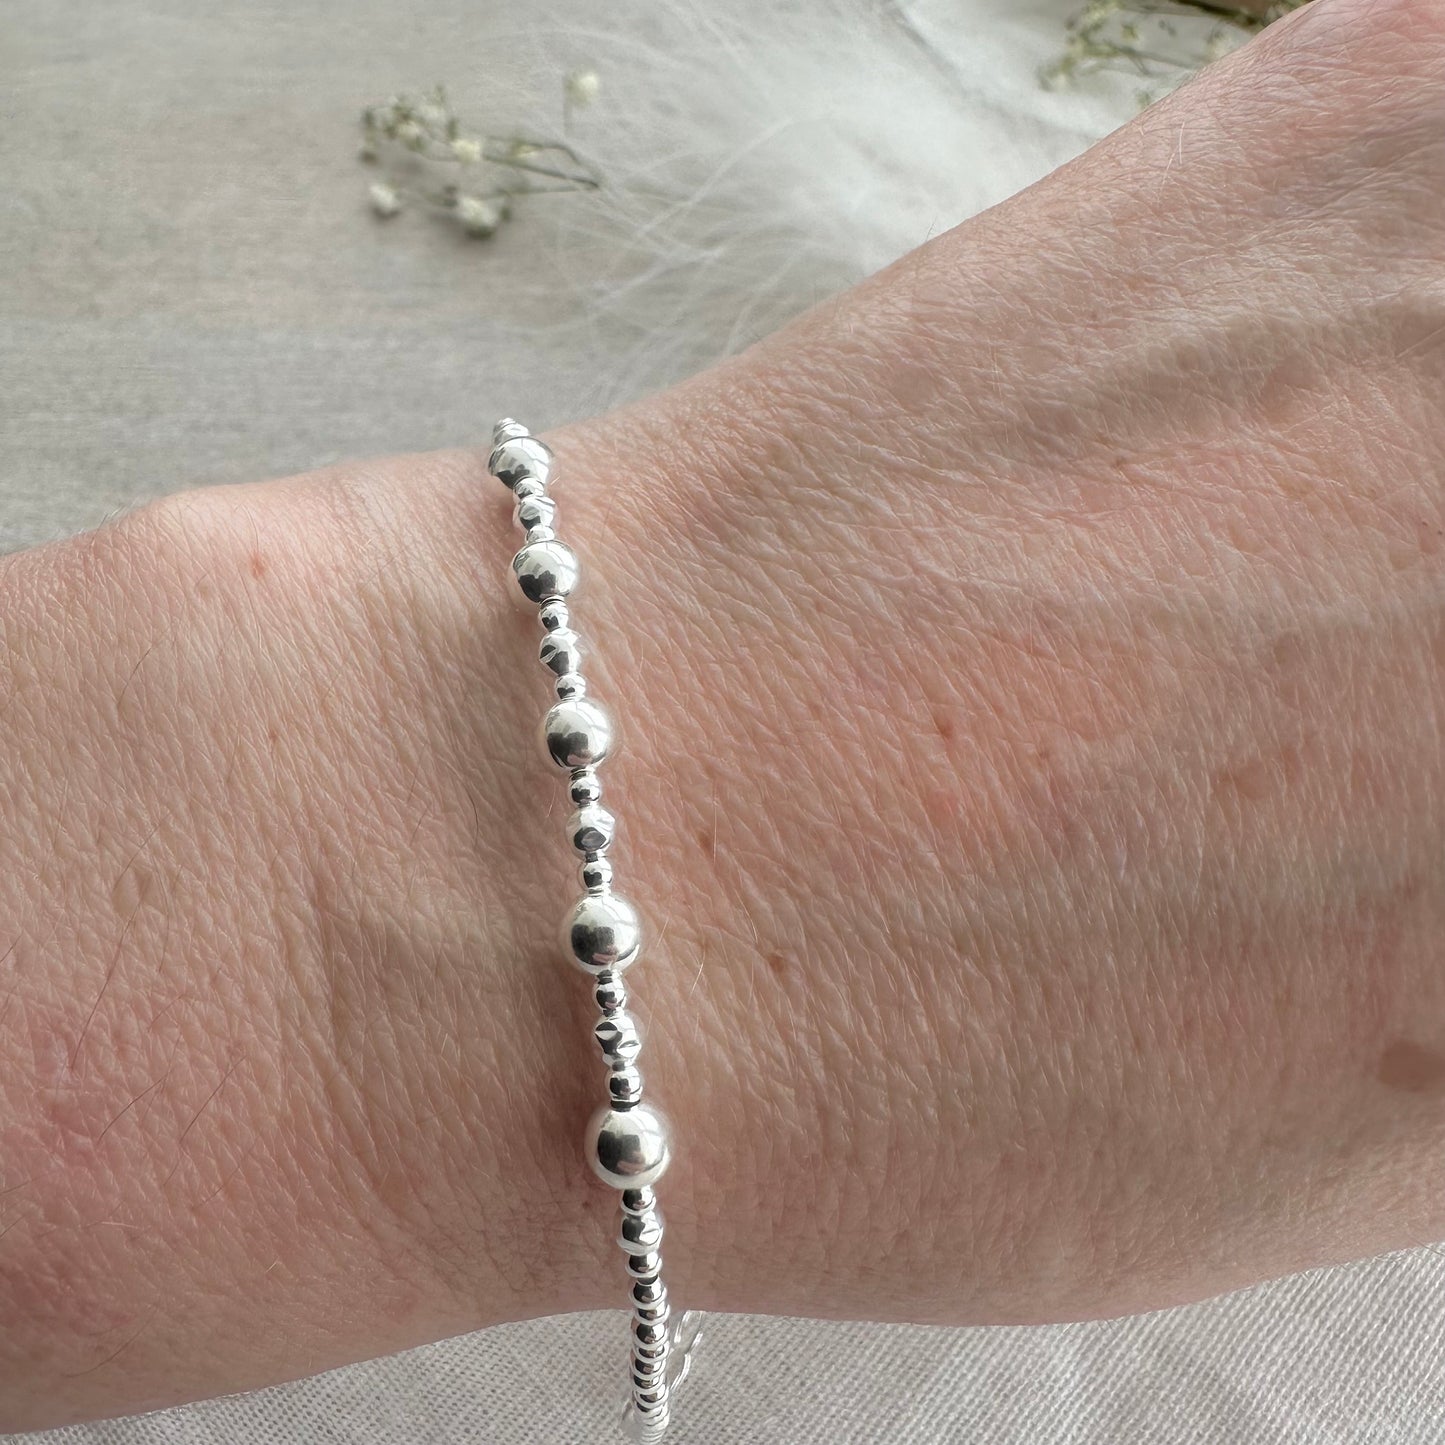 50th Birthday Gift 5 Beads 5 Decades Bracelet, Jewellery Gift for Her 50th in Sterling Silver